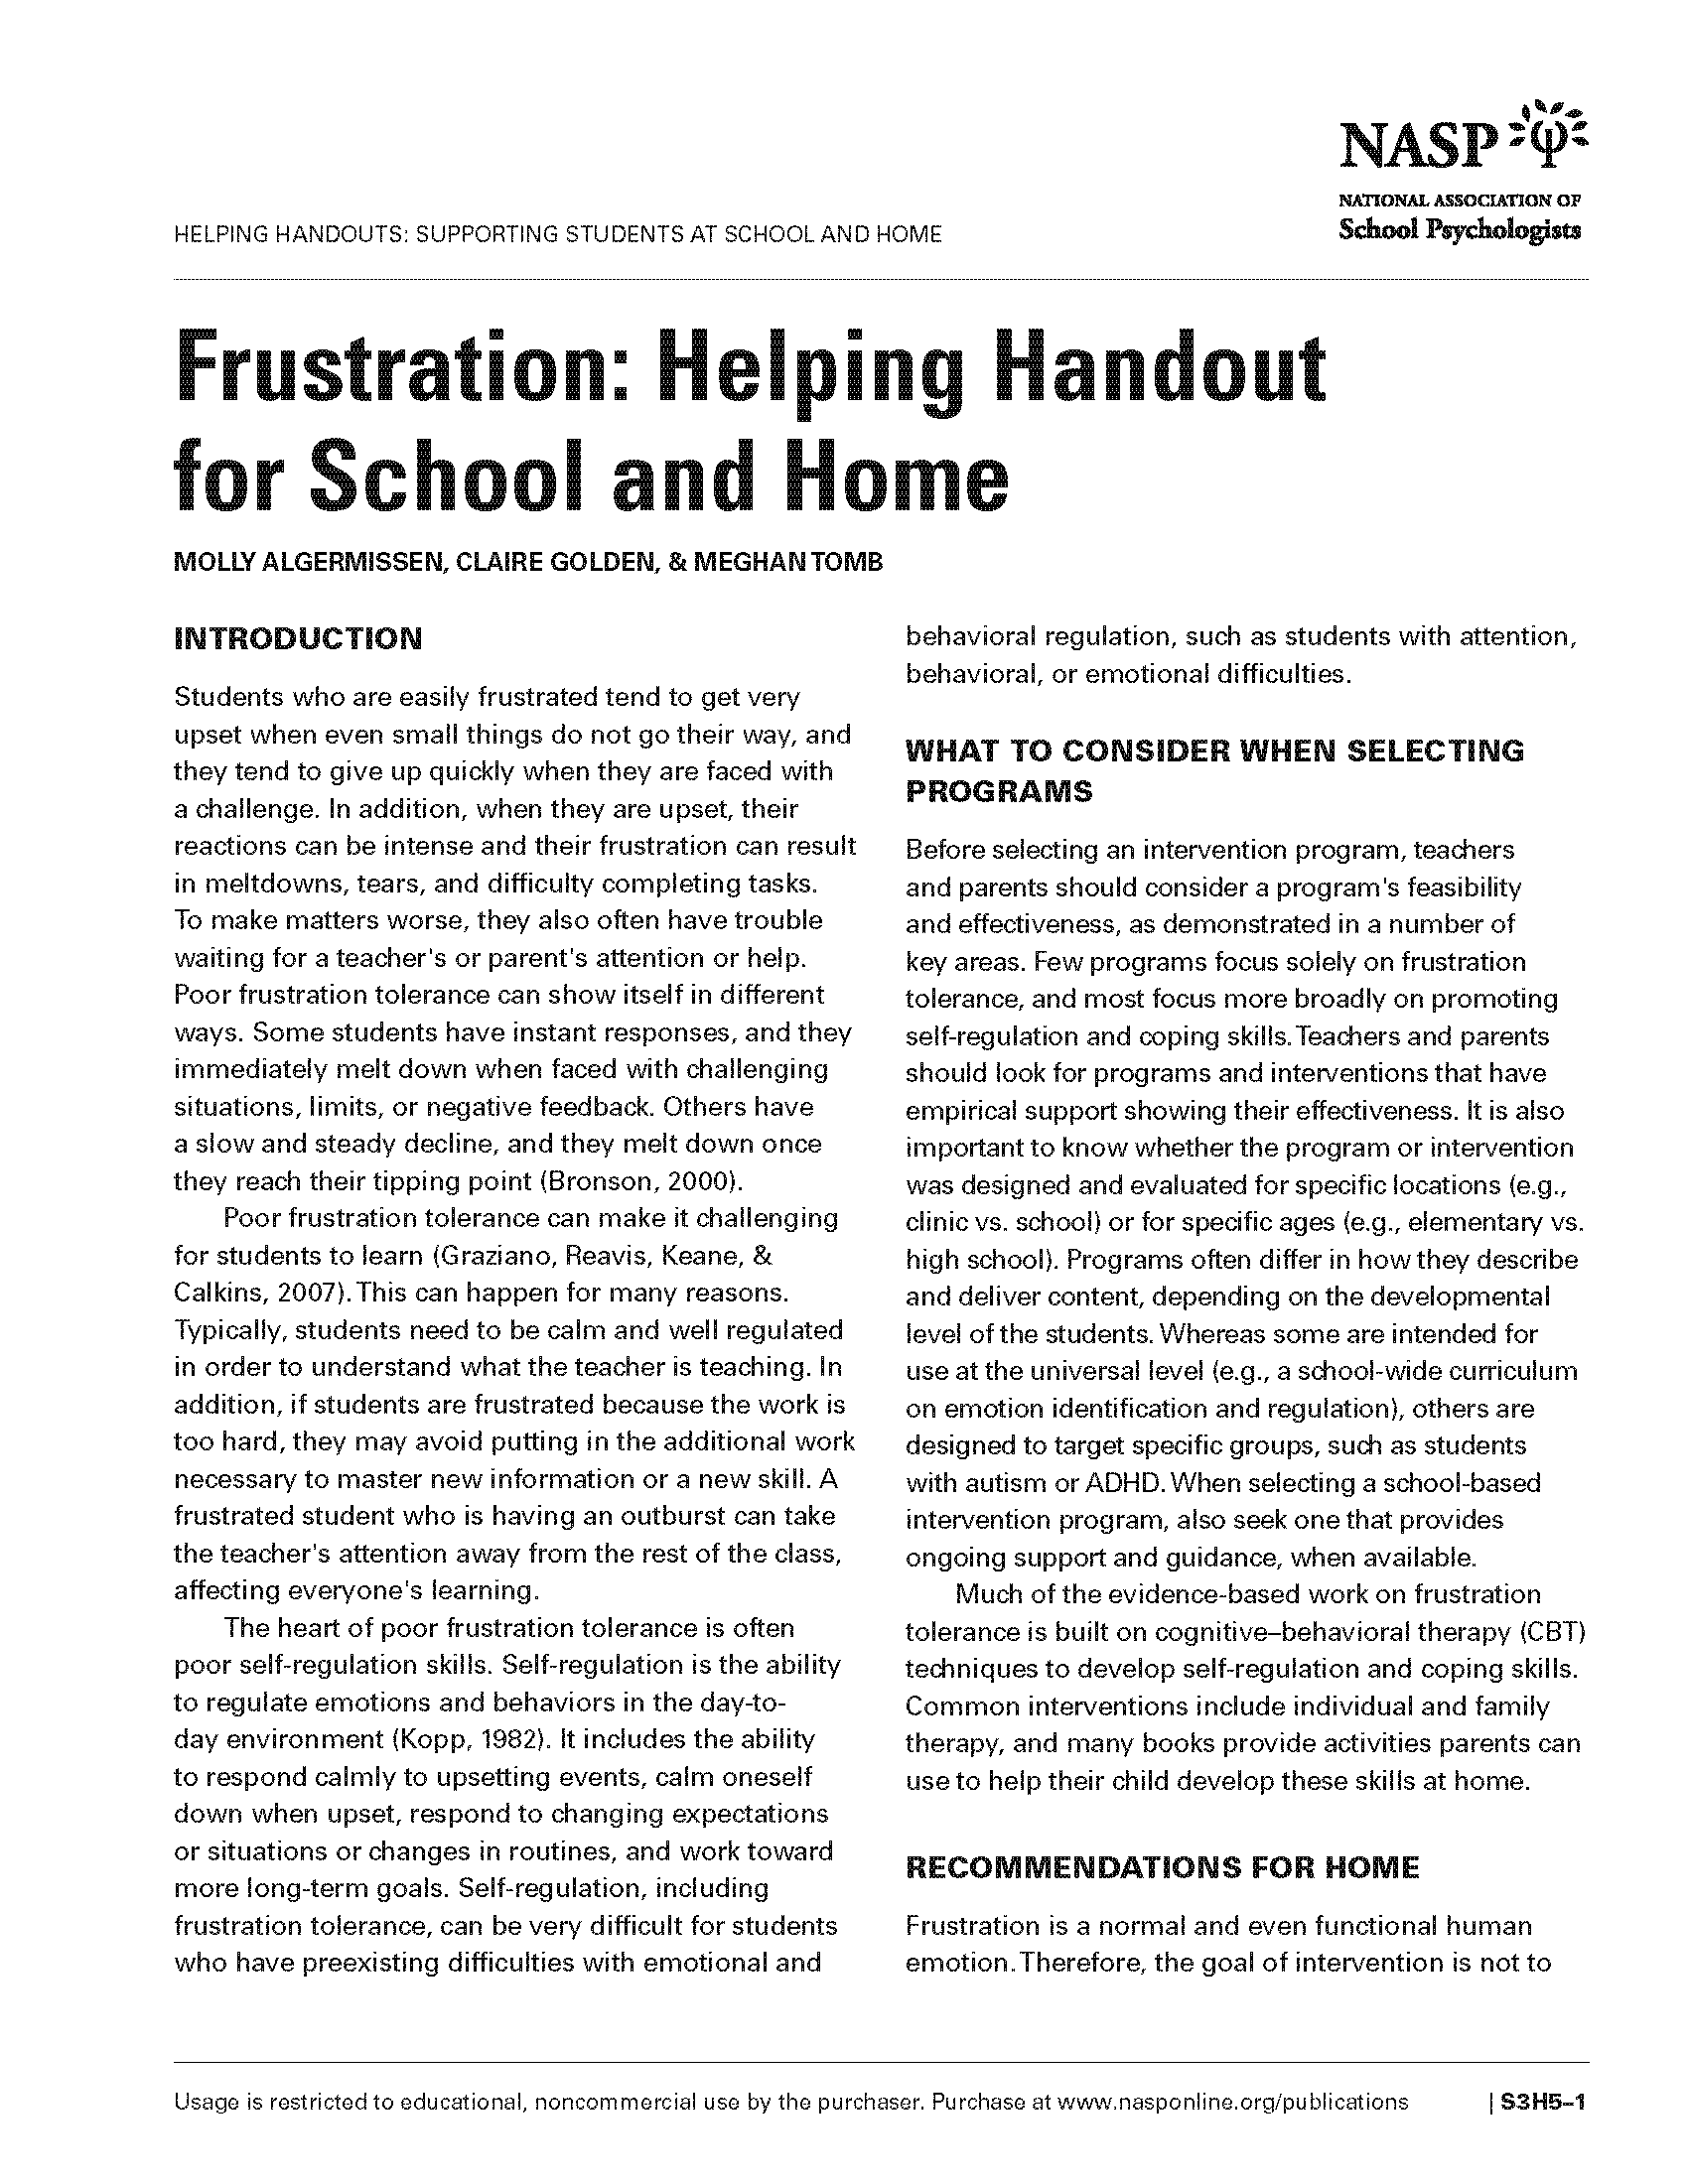 Frustration: Helping Handout for School and Home